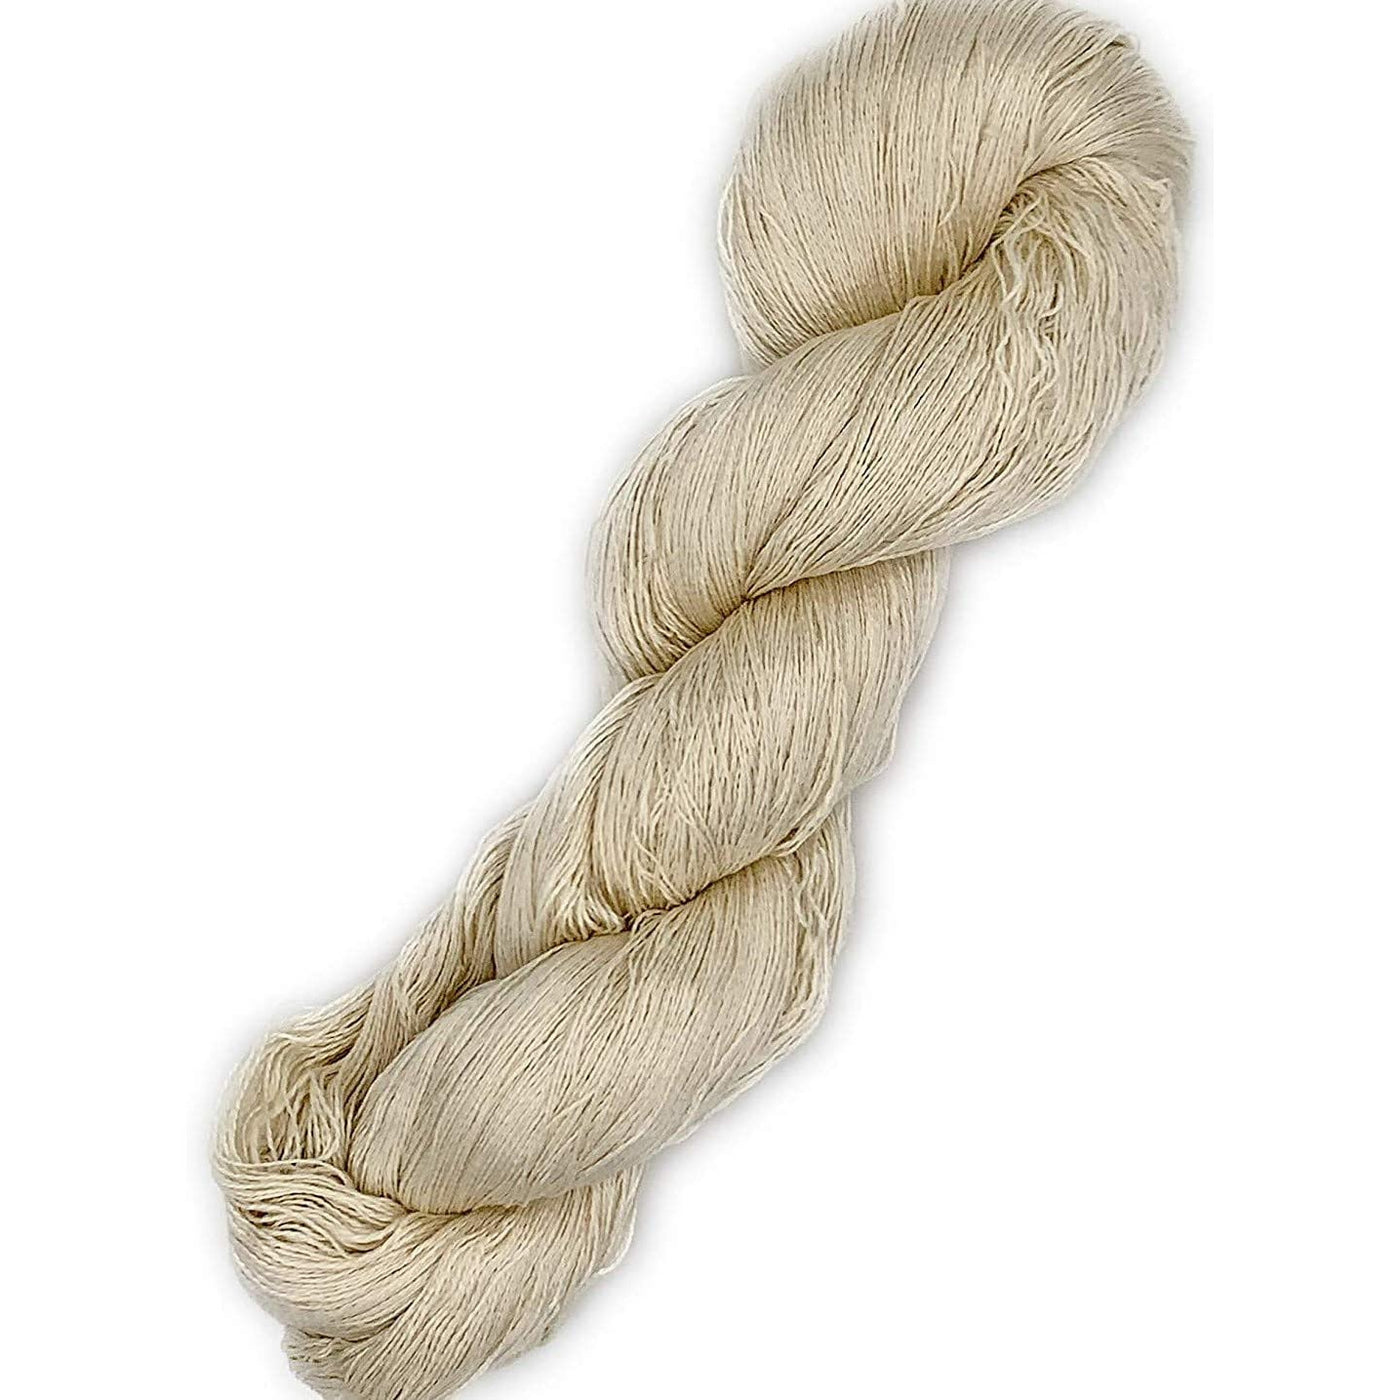 Revolution Fibers Mulberry Silk Lace Yarn, 100% Pure Off-White (Undyed) Lace Weight Skein Silk 20/2, Can Be Dyed, 100 Grams - 1000 Yards per Hank, Wea